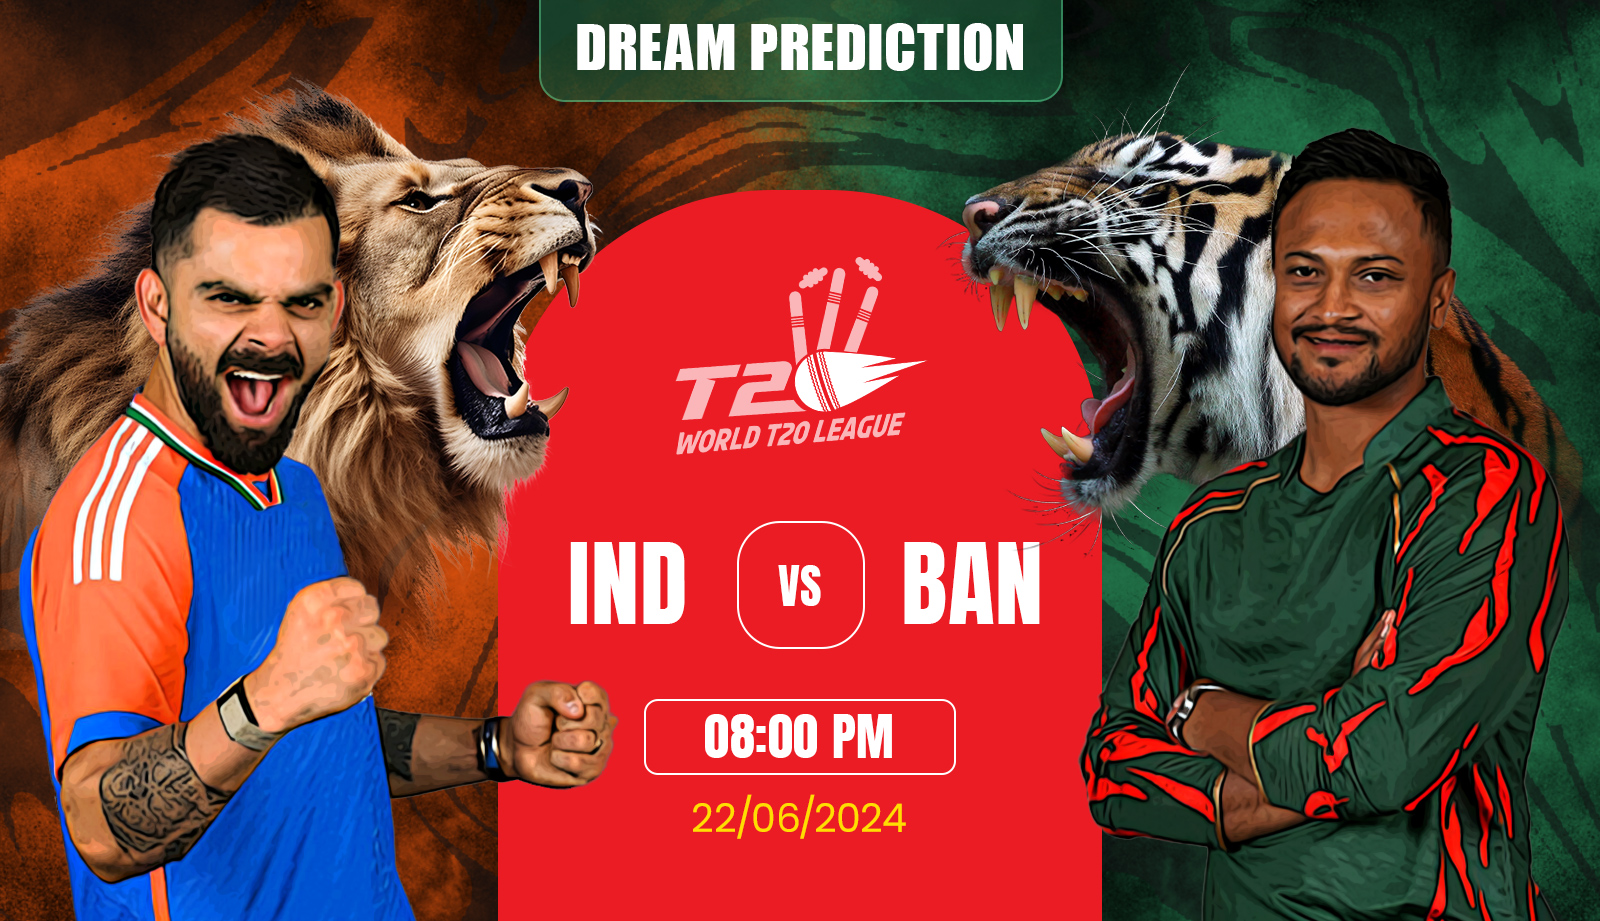 IND-IND-vs-BAN-dream11-prediction-t20-wc-fantasy-cricket-tips-playing-xi-pitch-report-injury-updates-for-match-47-of-t20-world-cup-2024